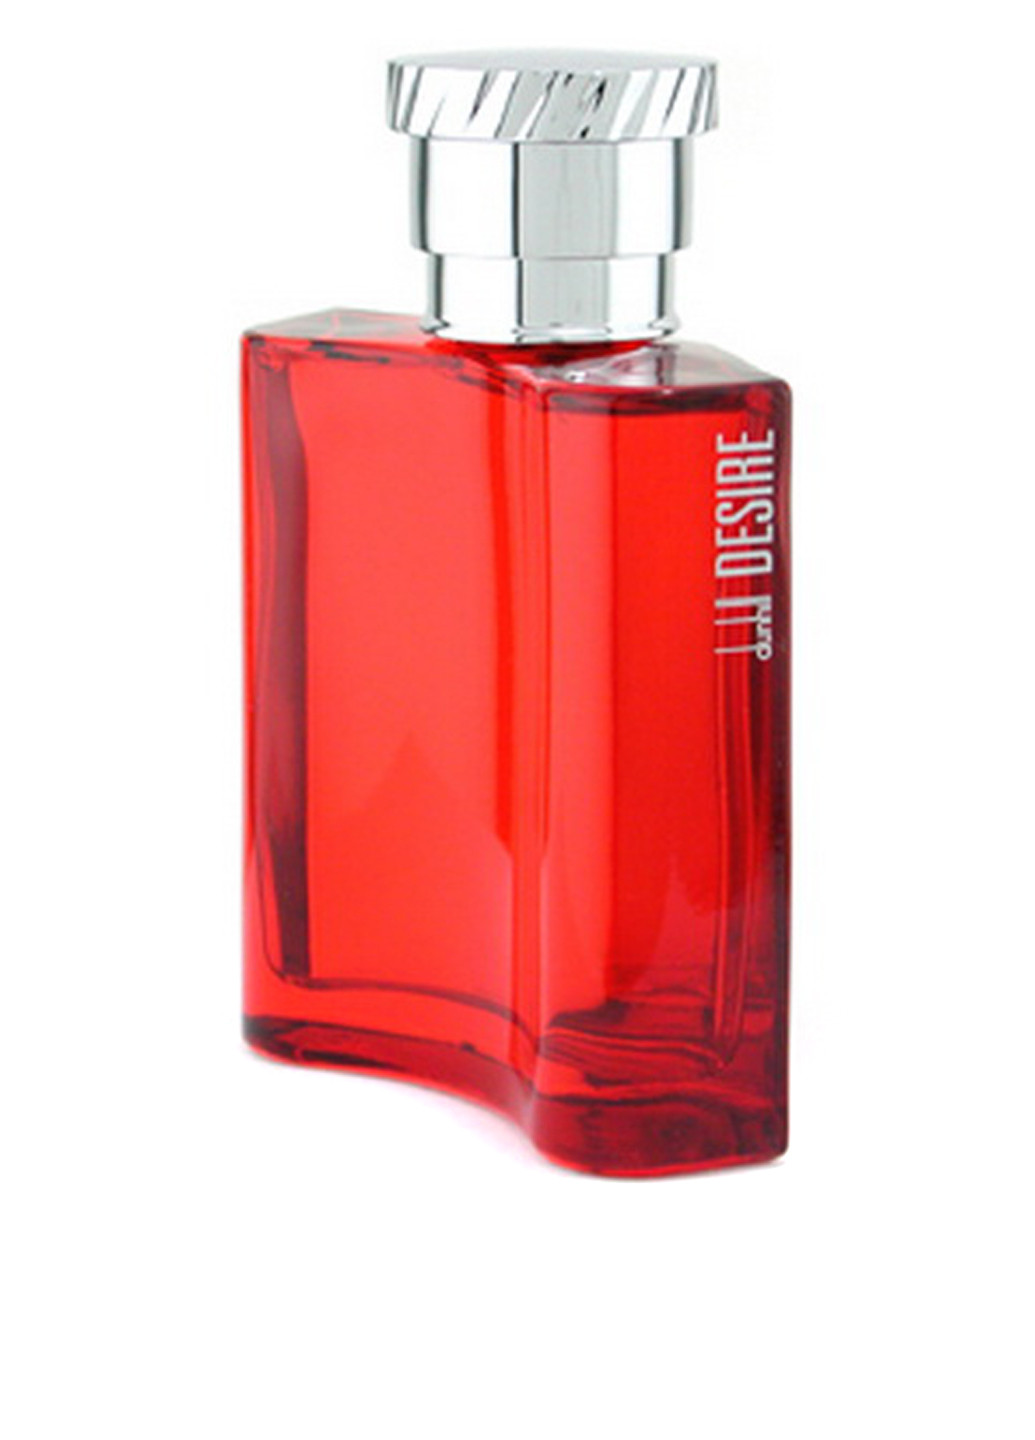 Туалетная вода Desire Pour Homme, 50 мл Alfred Dunhill (64889212)